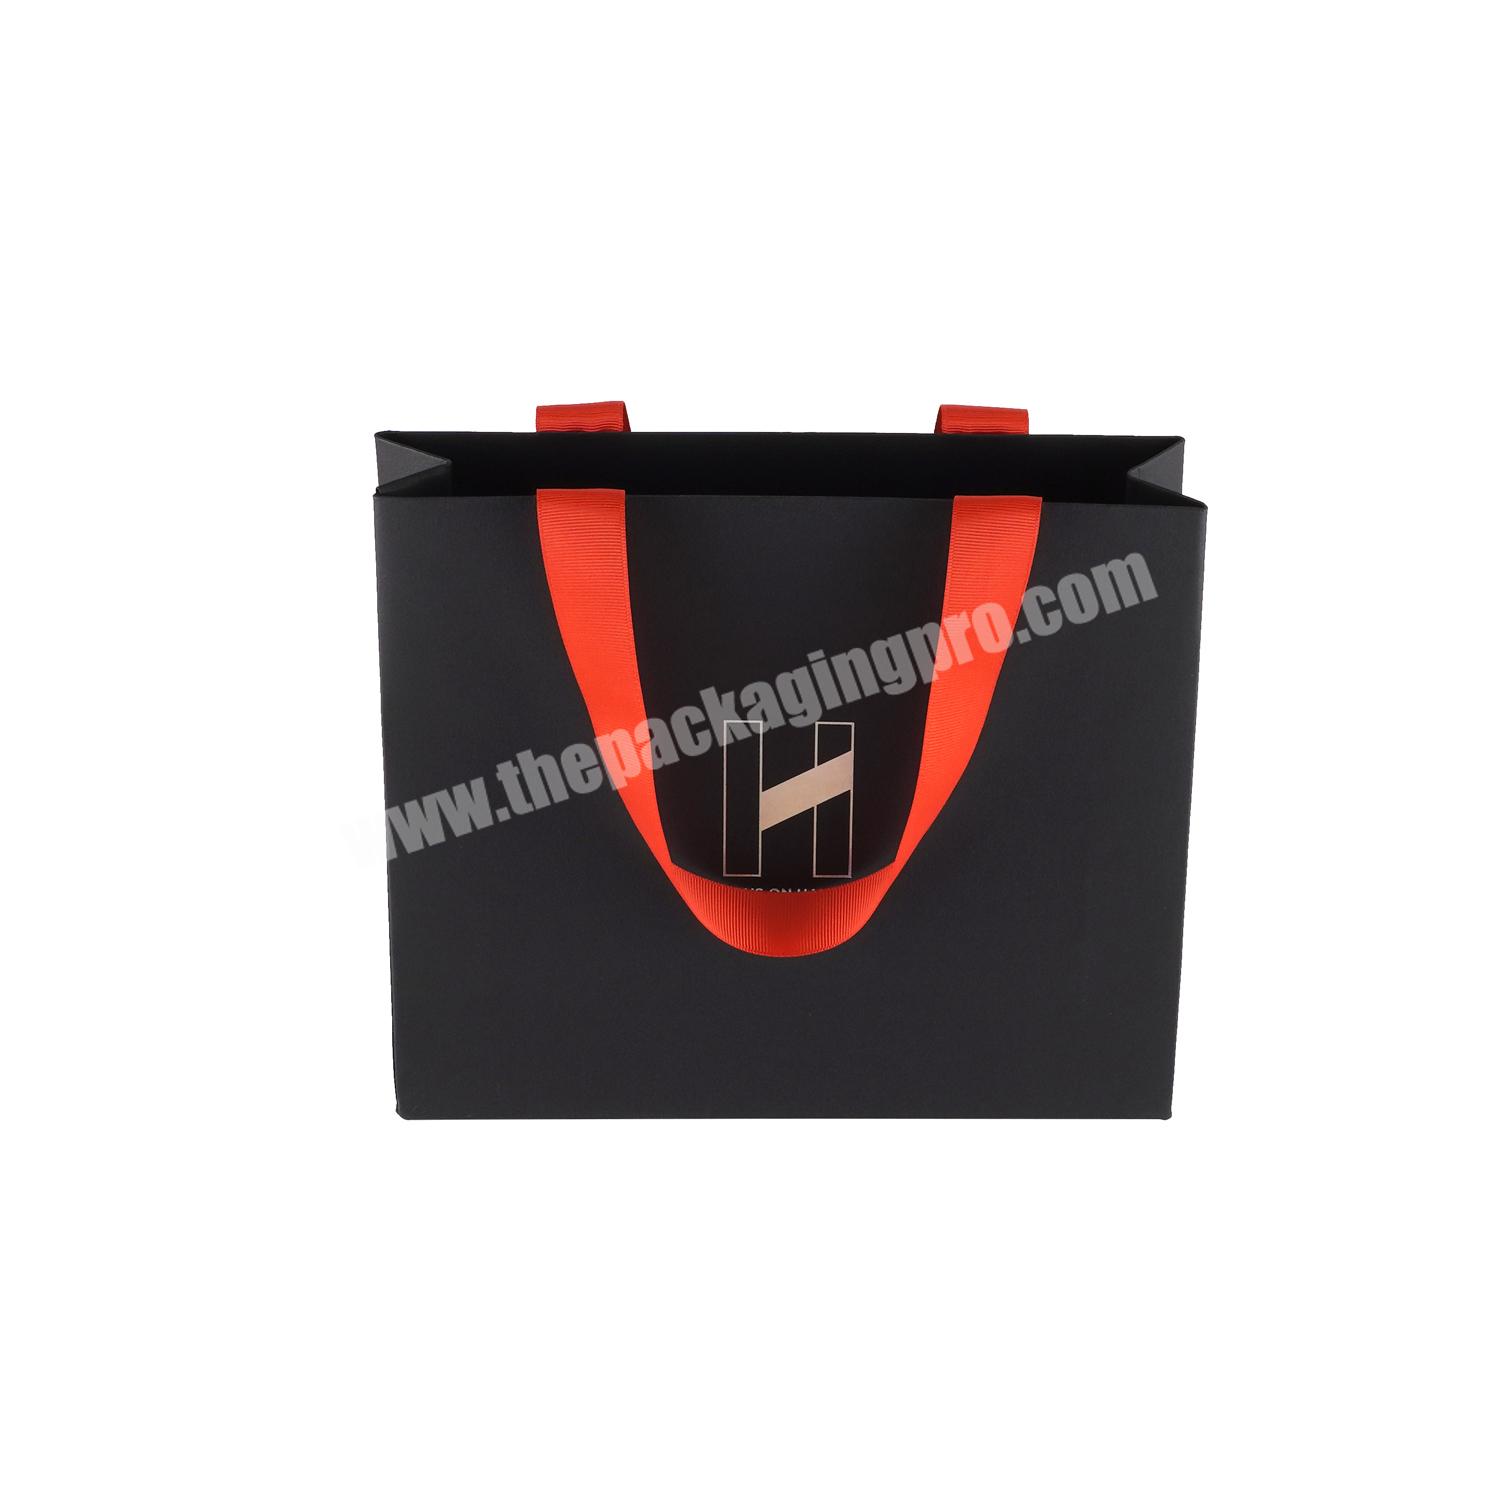 Wholesale Customized Recyclable Luxury Gift Paper Bags With Handles For Shopping Bags With Your Own Logo